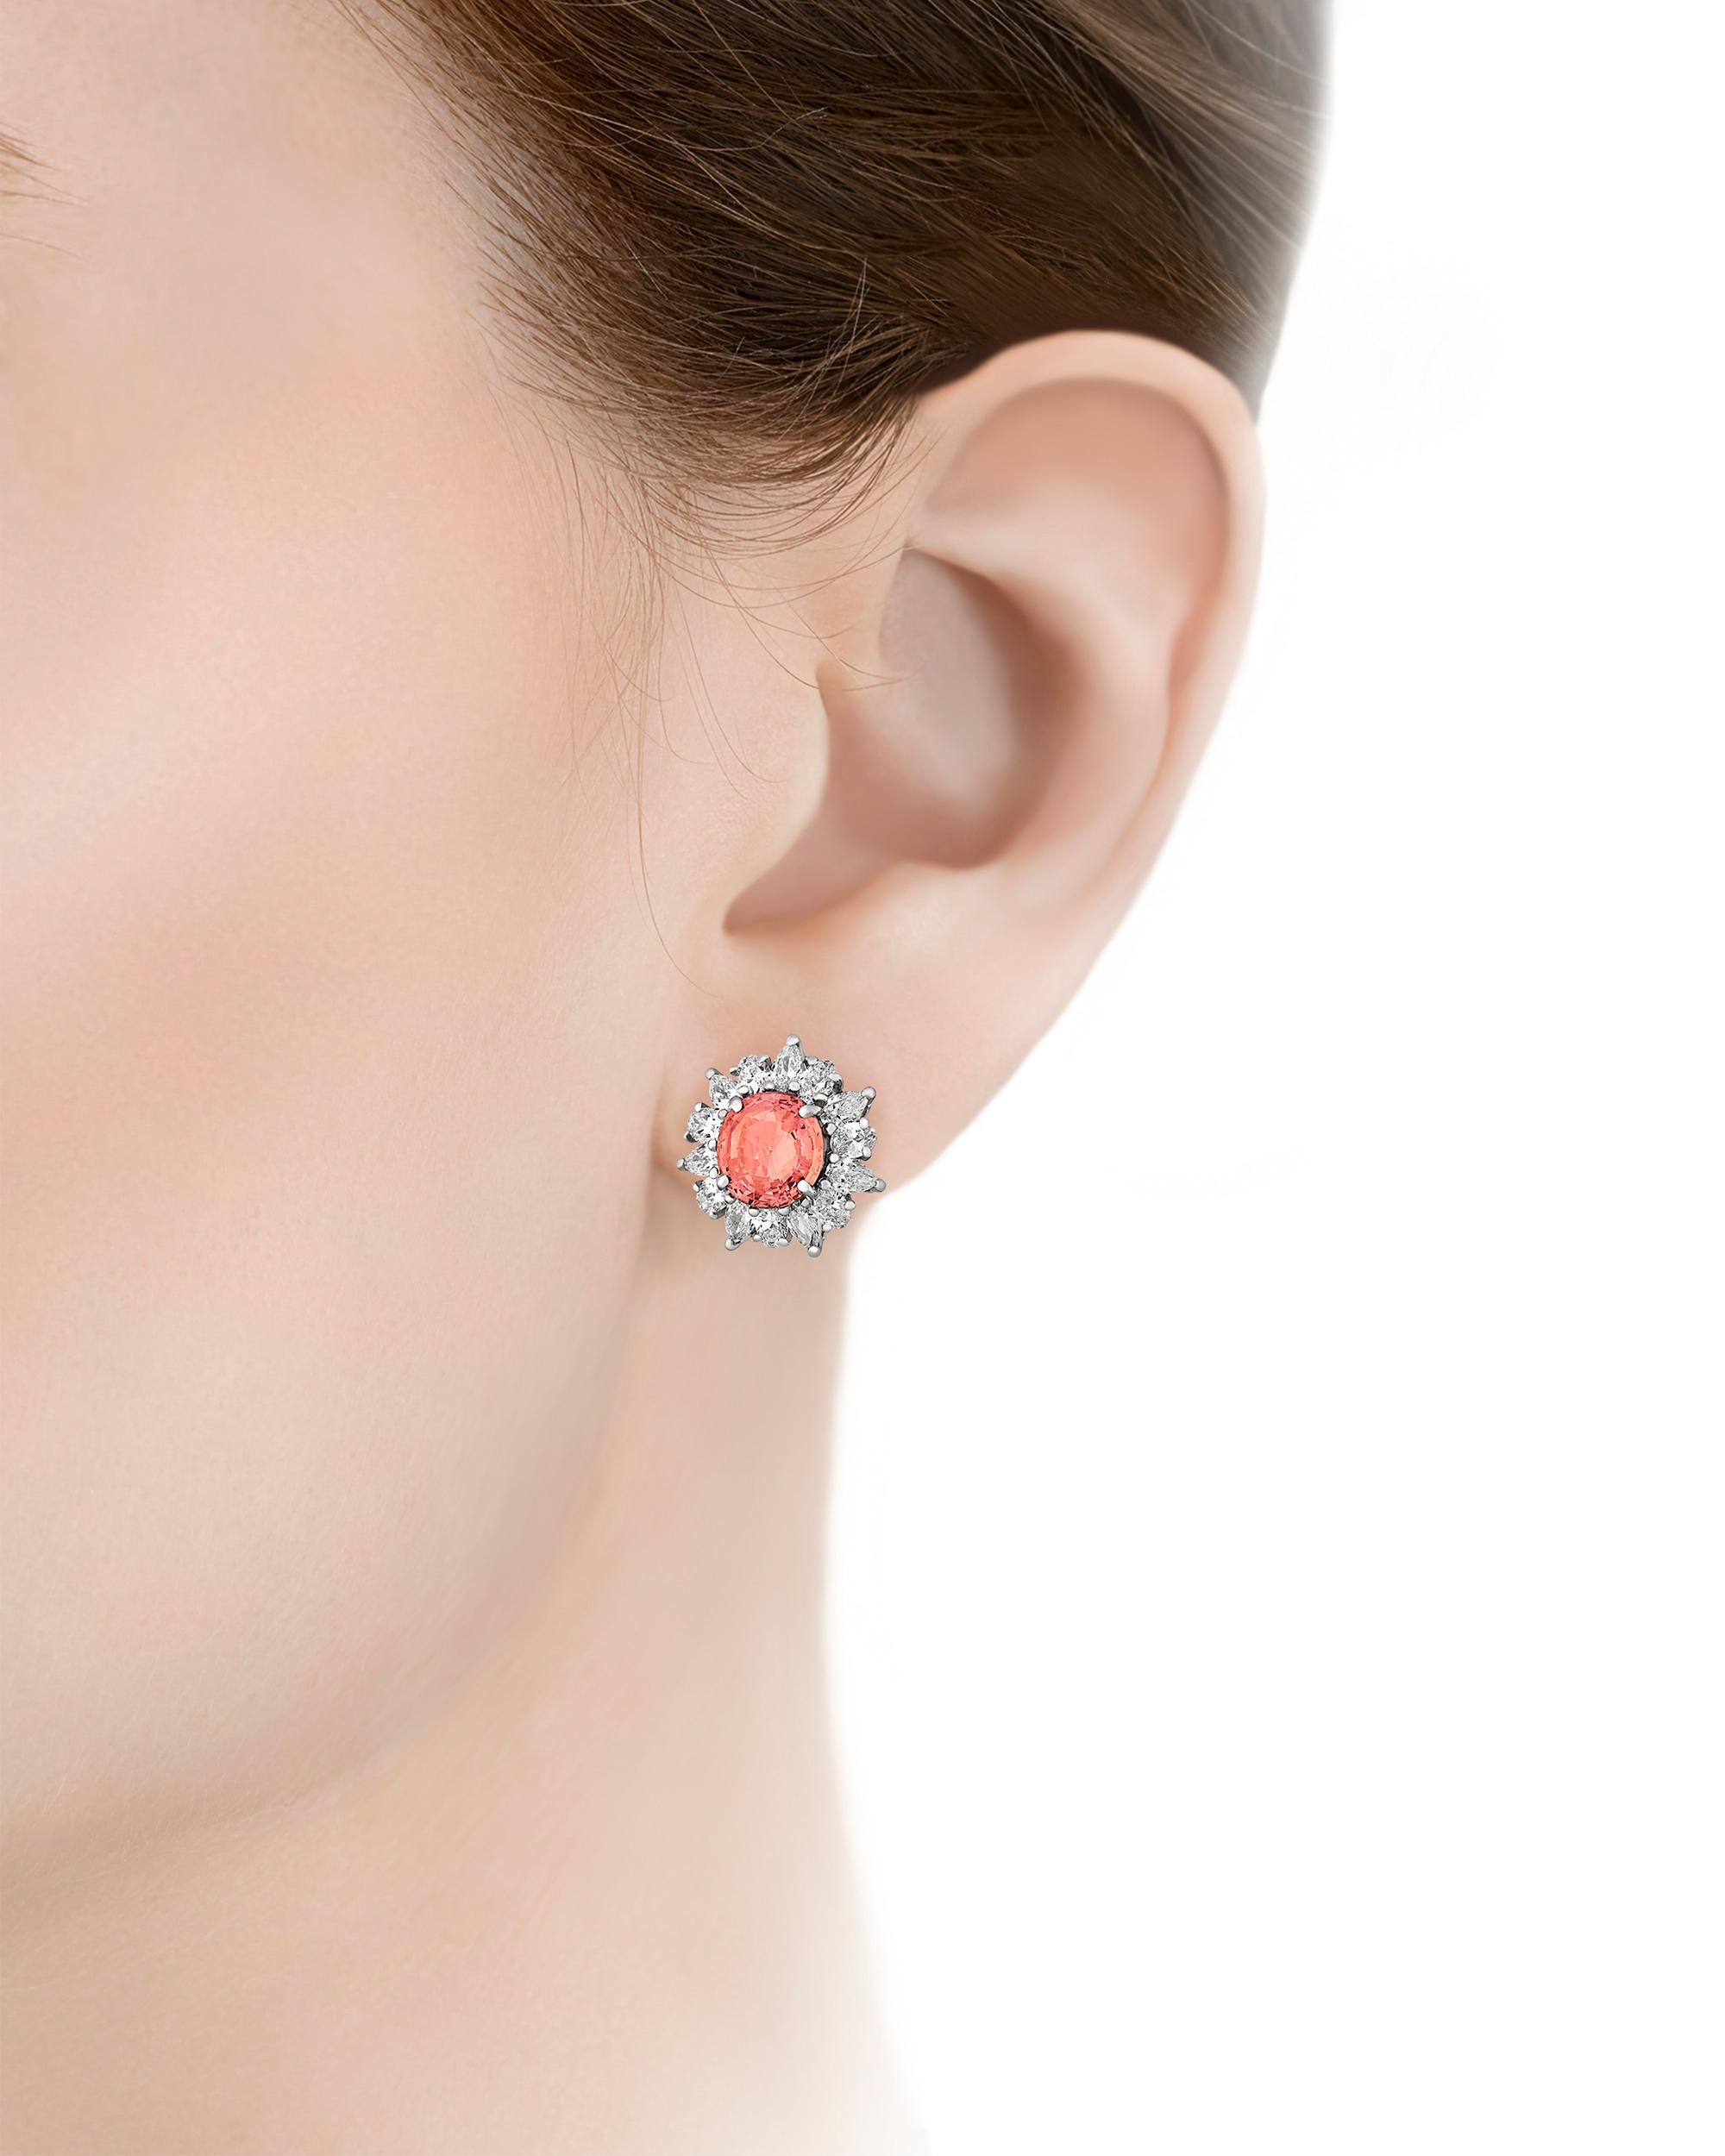 Not one, but two highly desirable Padparadscha sapphires are featured in these earrings by the famed Oscar Heyman. Weighing 5.11 total carats, the jewels are well-matched in both size and color, each displaying the unique pinkish-orange color for